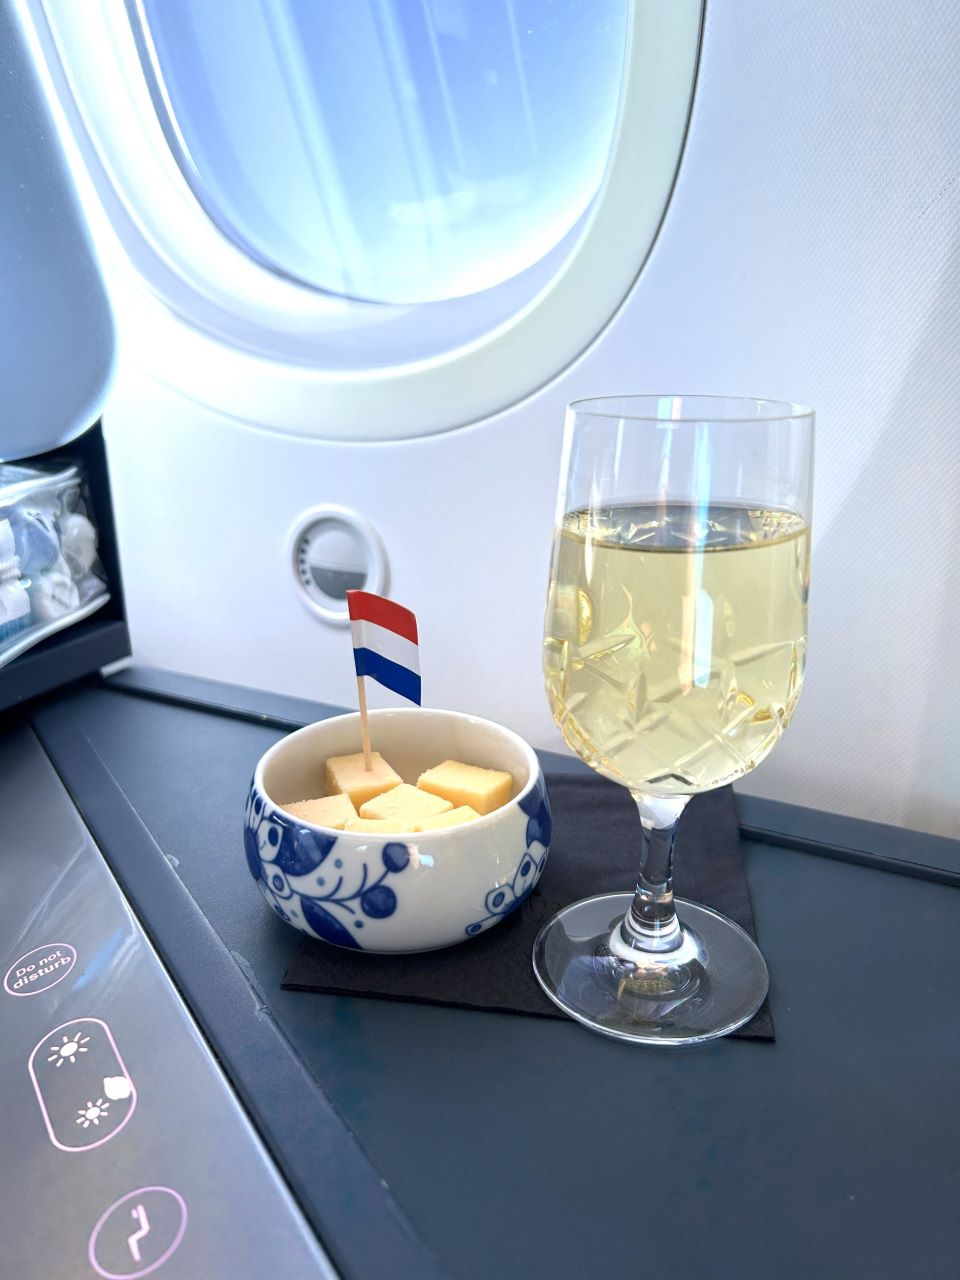 KLM Business Class champagne and cheese